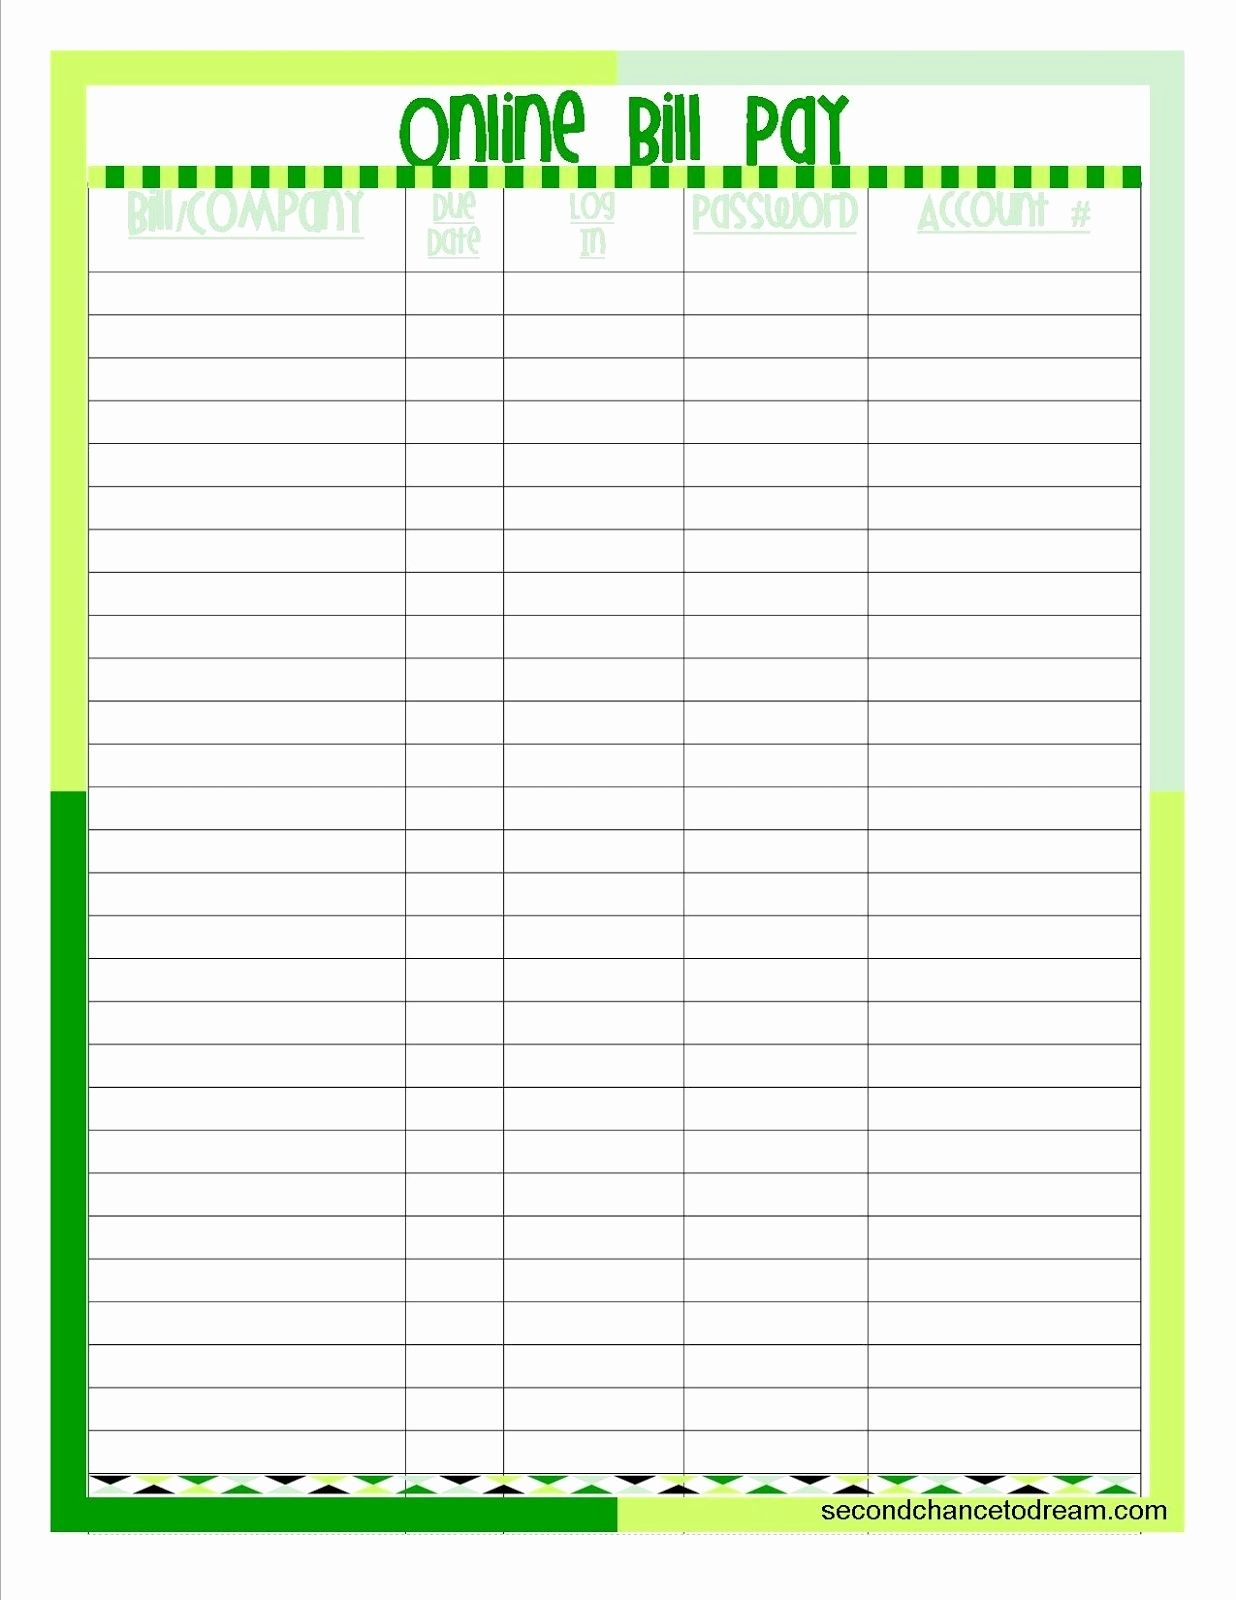 Monthly Bill Payment Blank Worksheet In 2020 | Financial